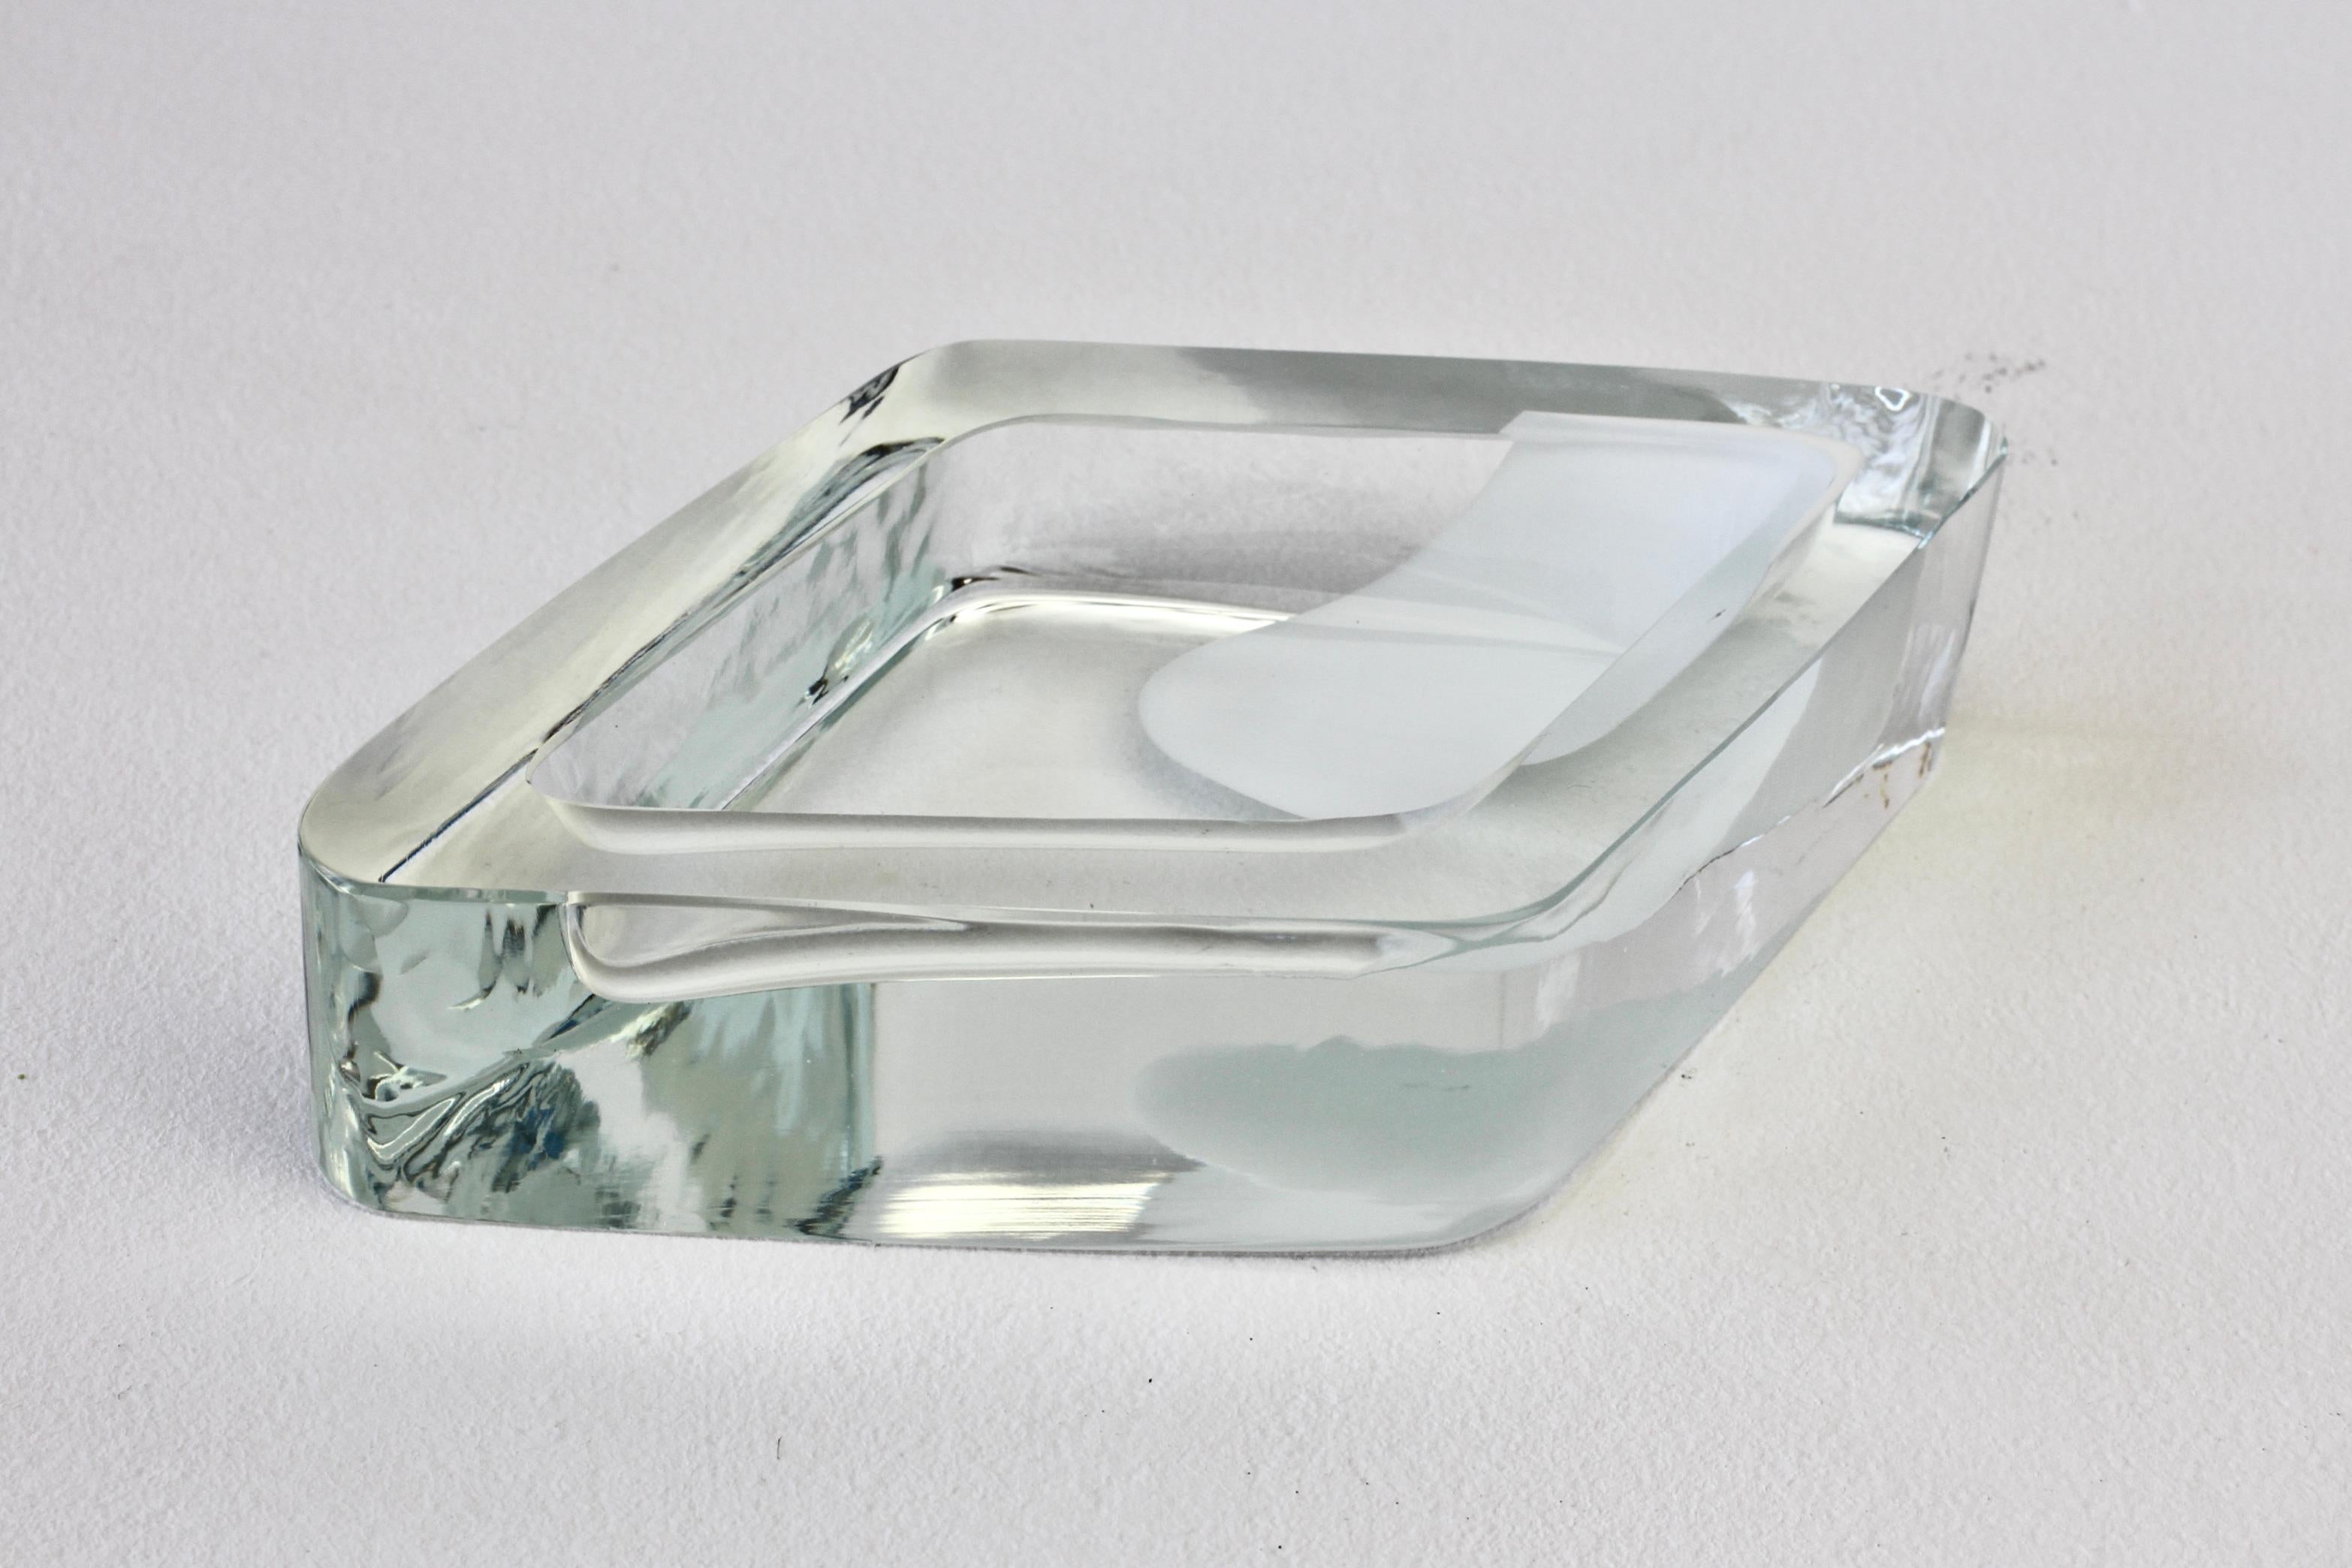 Large Cenedese Italian Rhombus White and Clear Murano Glass Bowl, Dish, Ashtray For Sale 1